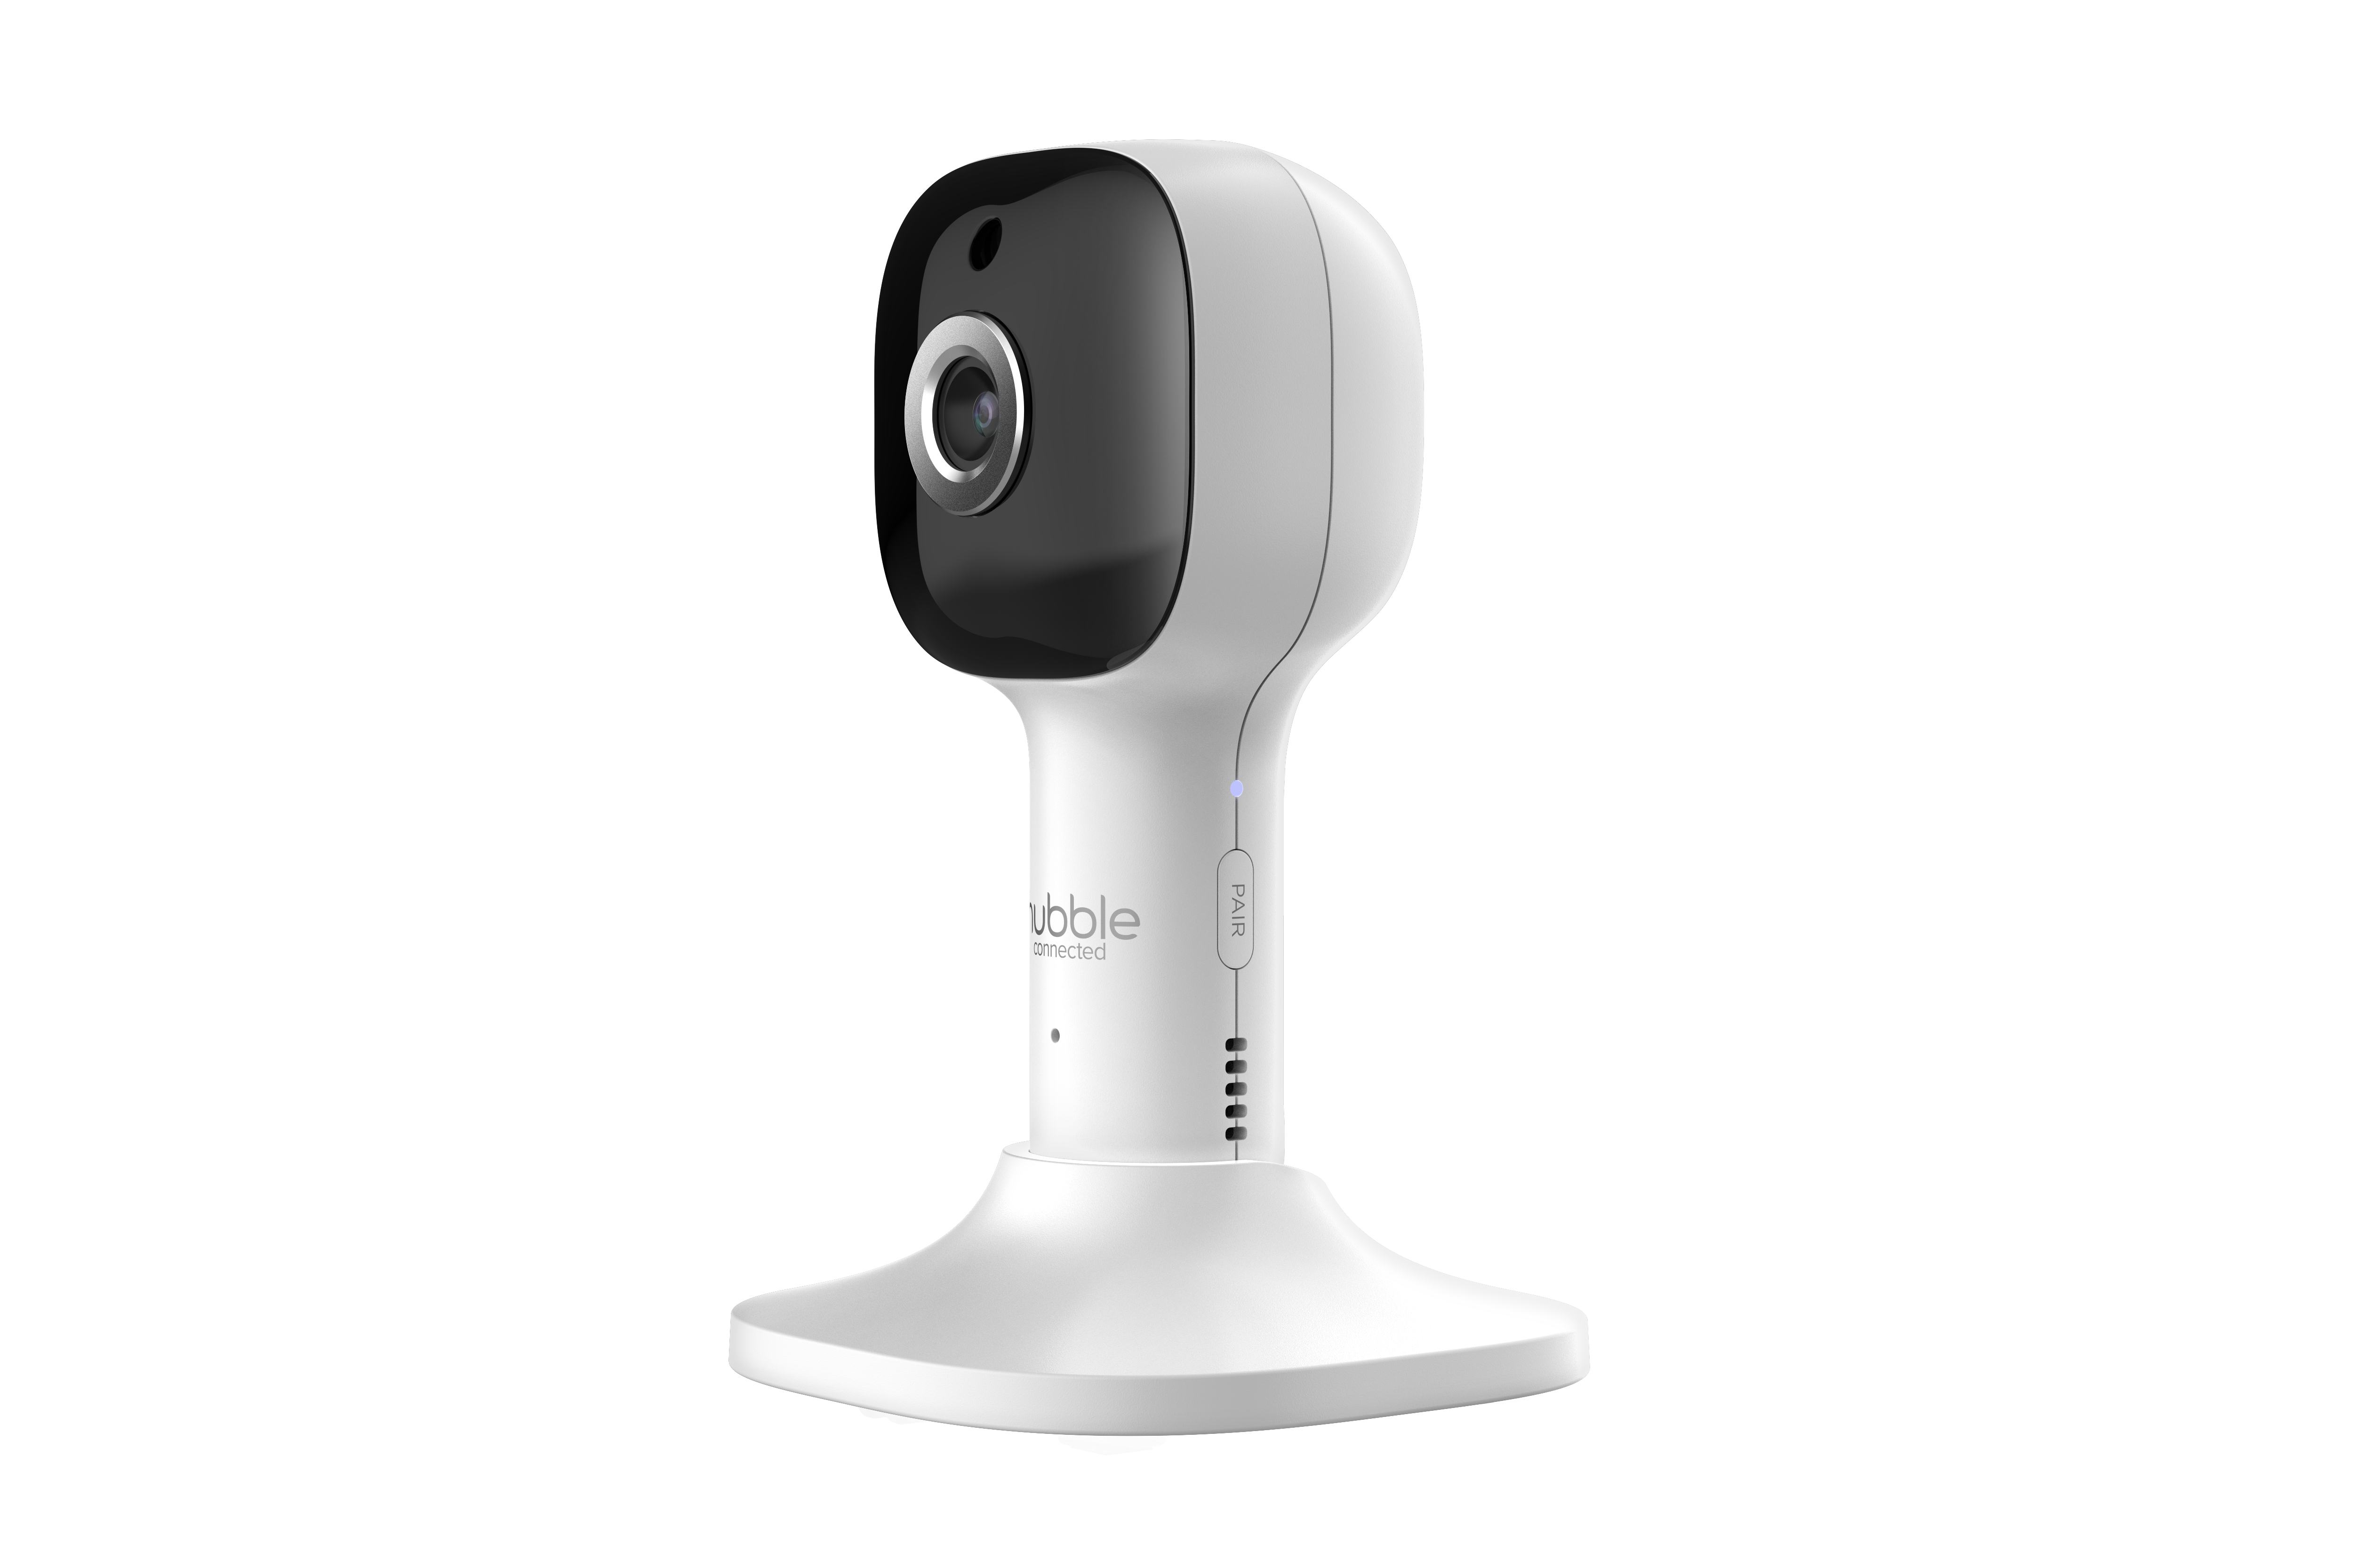 Oricom Hubble Smart Camera with Remote Access - Baby On The Move